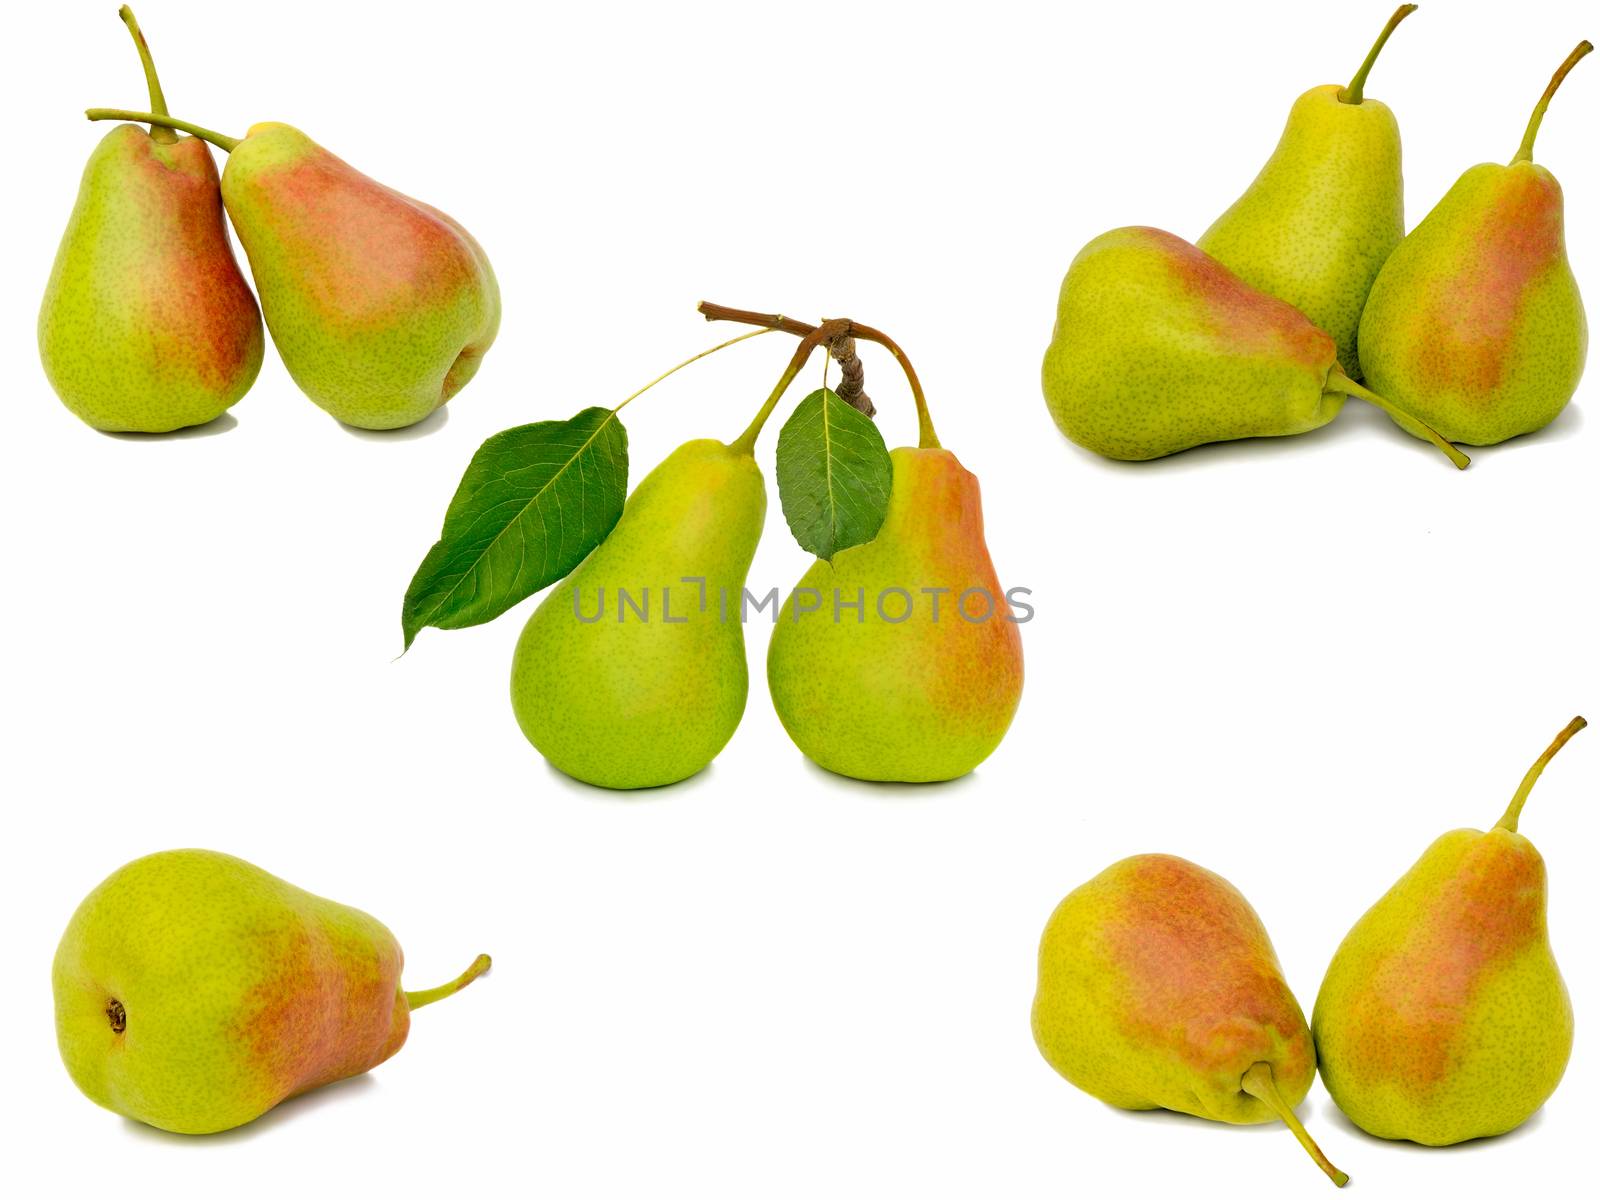  Ripe large yellow pears. Presented on a white background. by georgina198